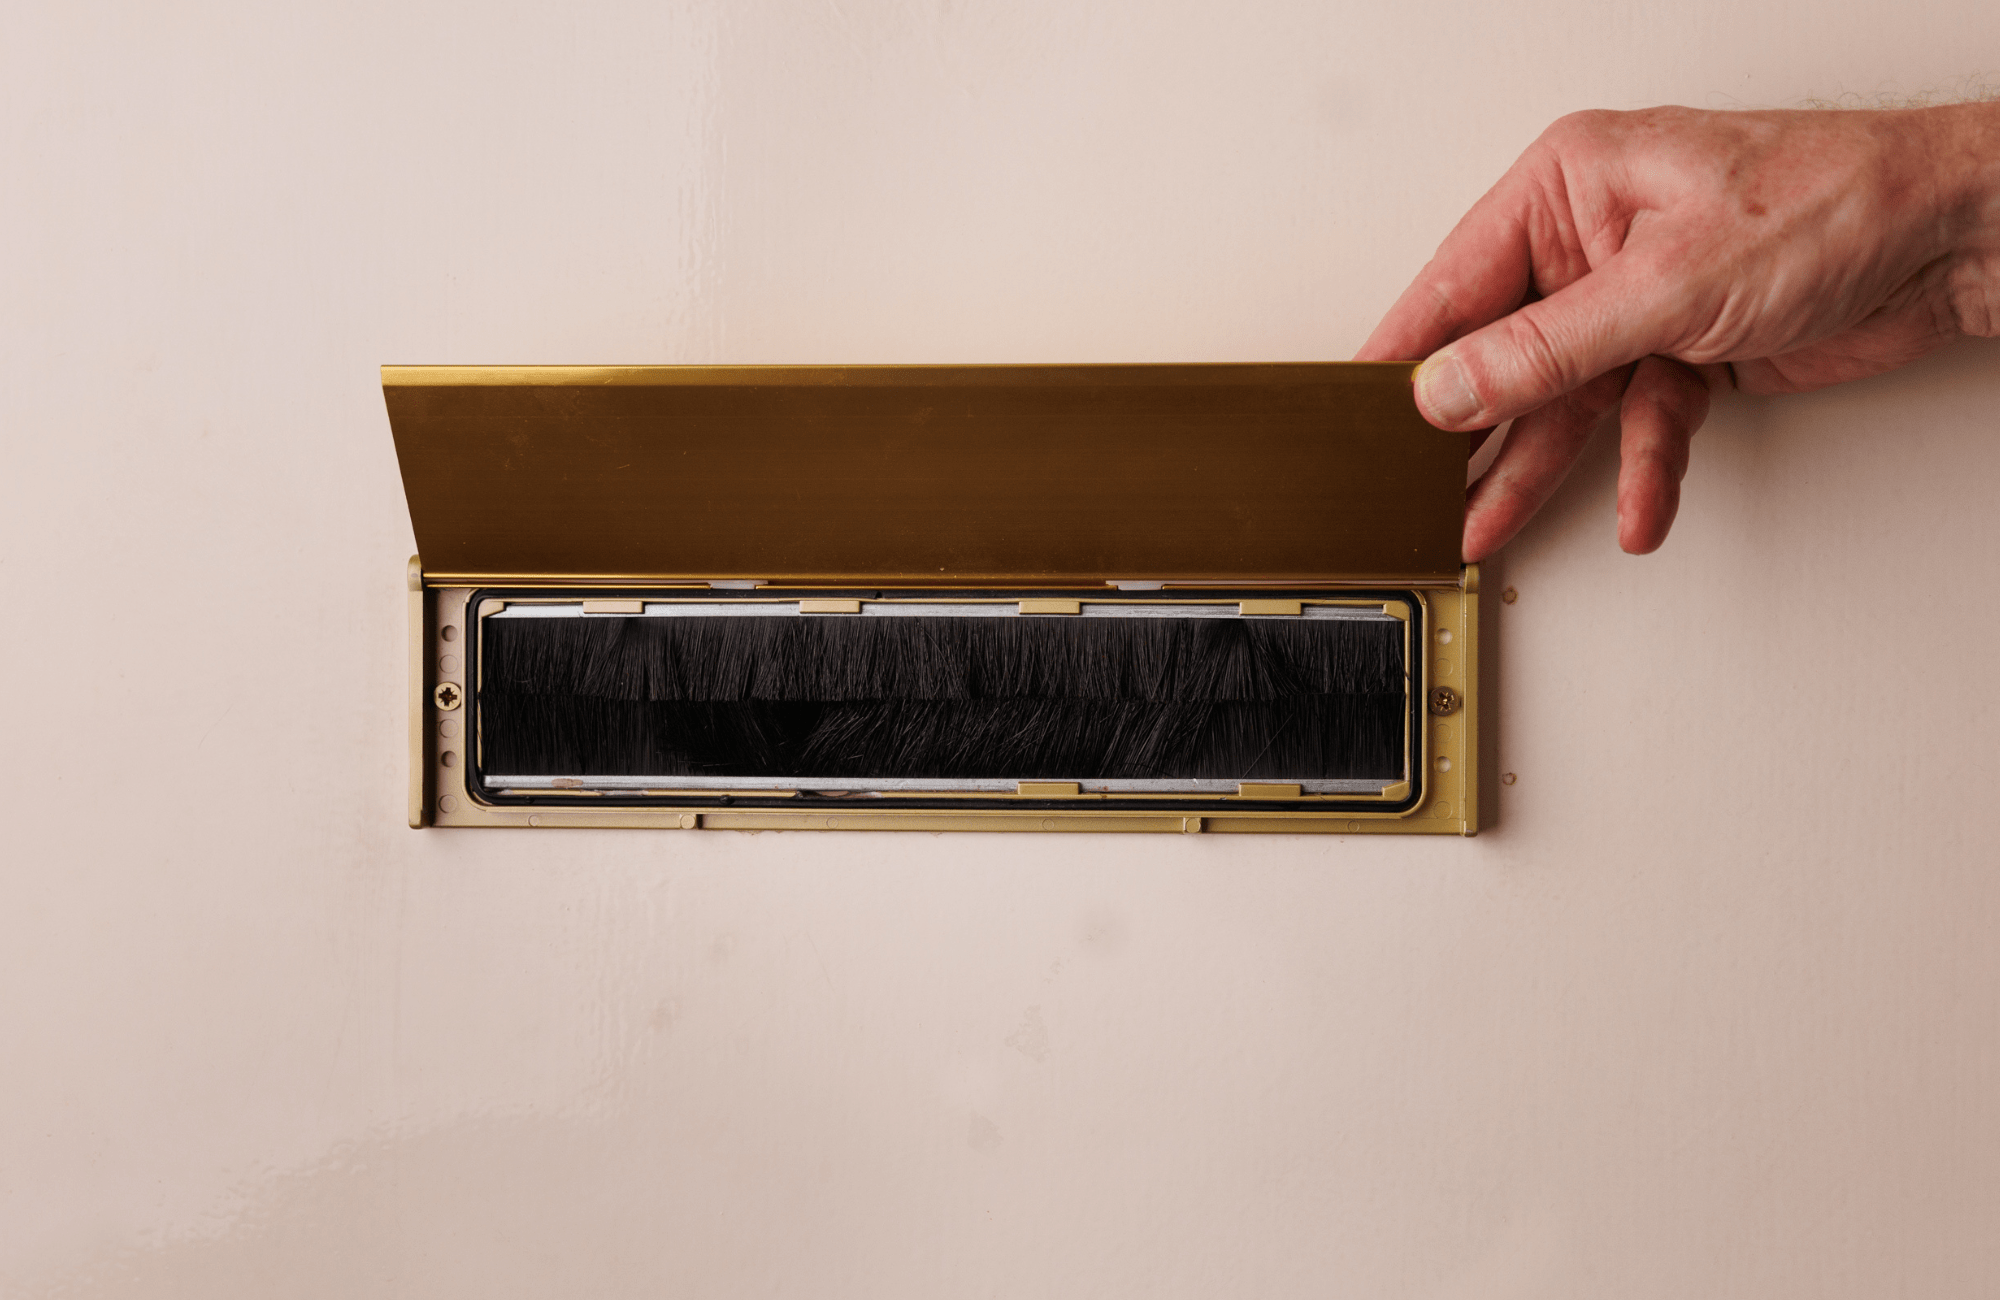 A hand opening a letterbox.